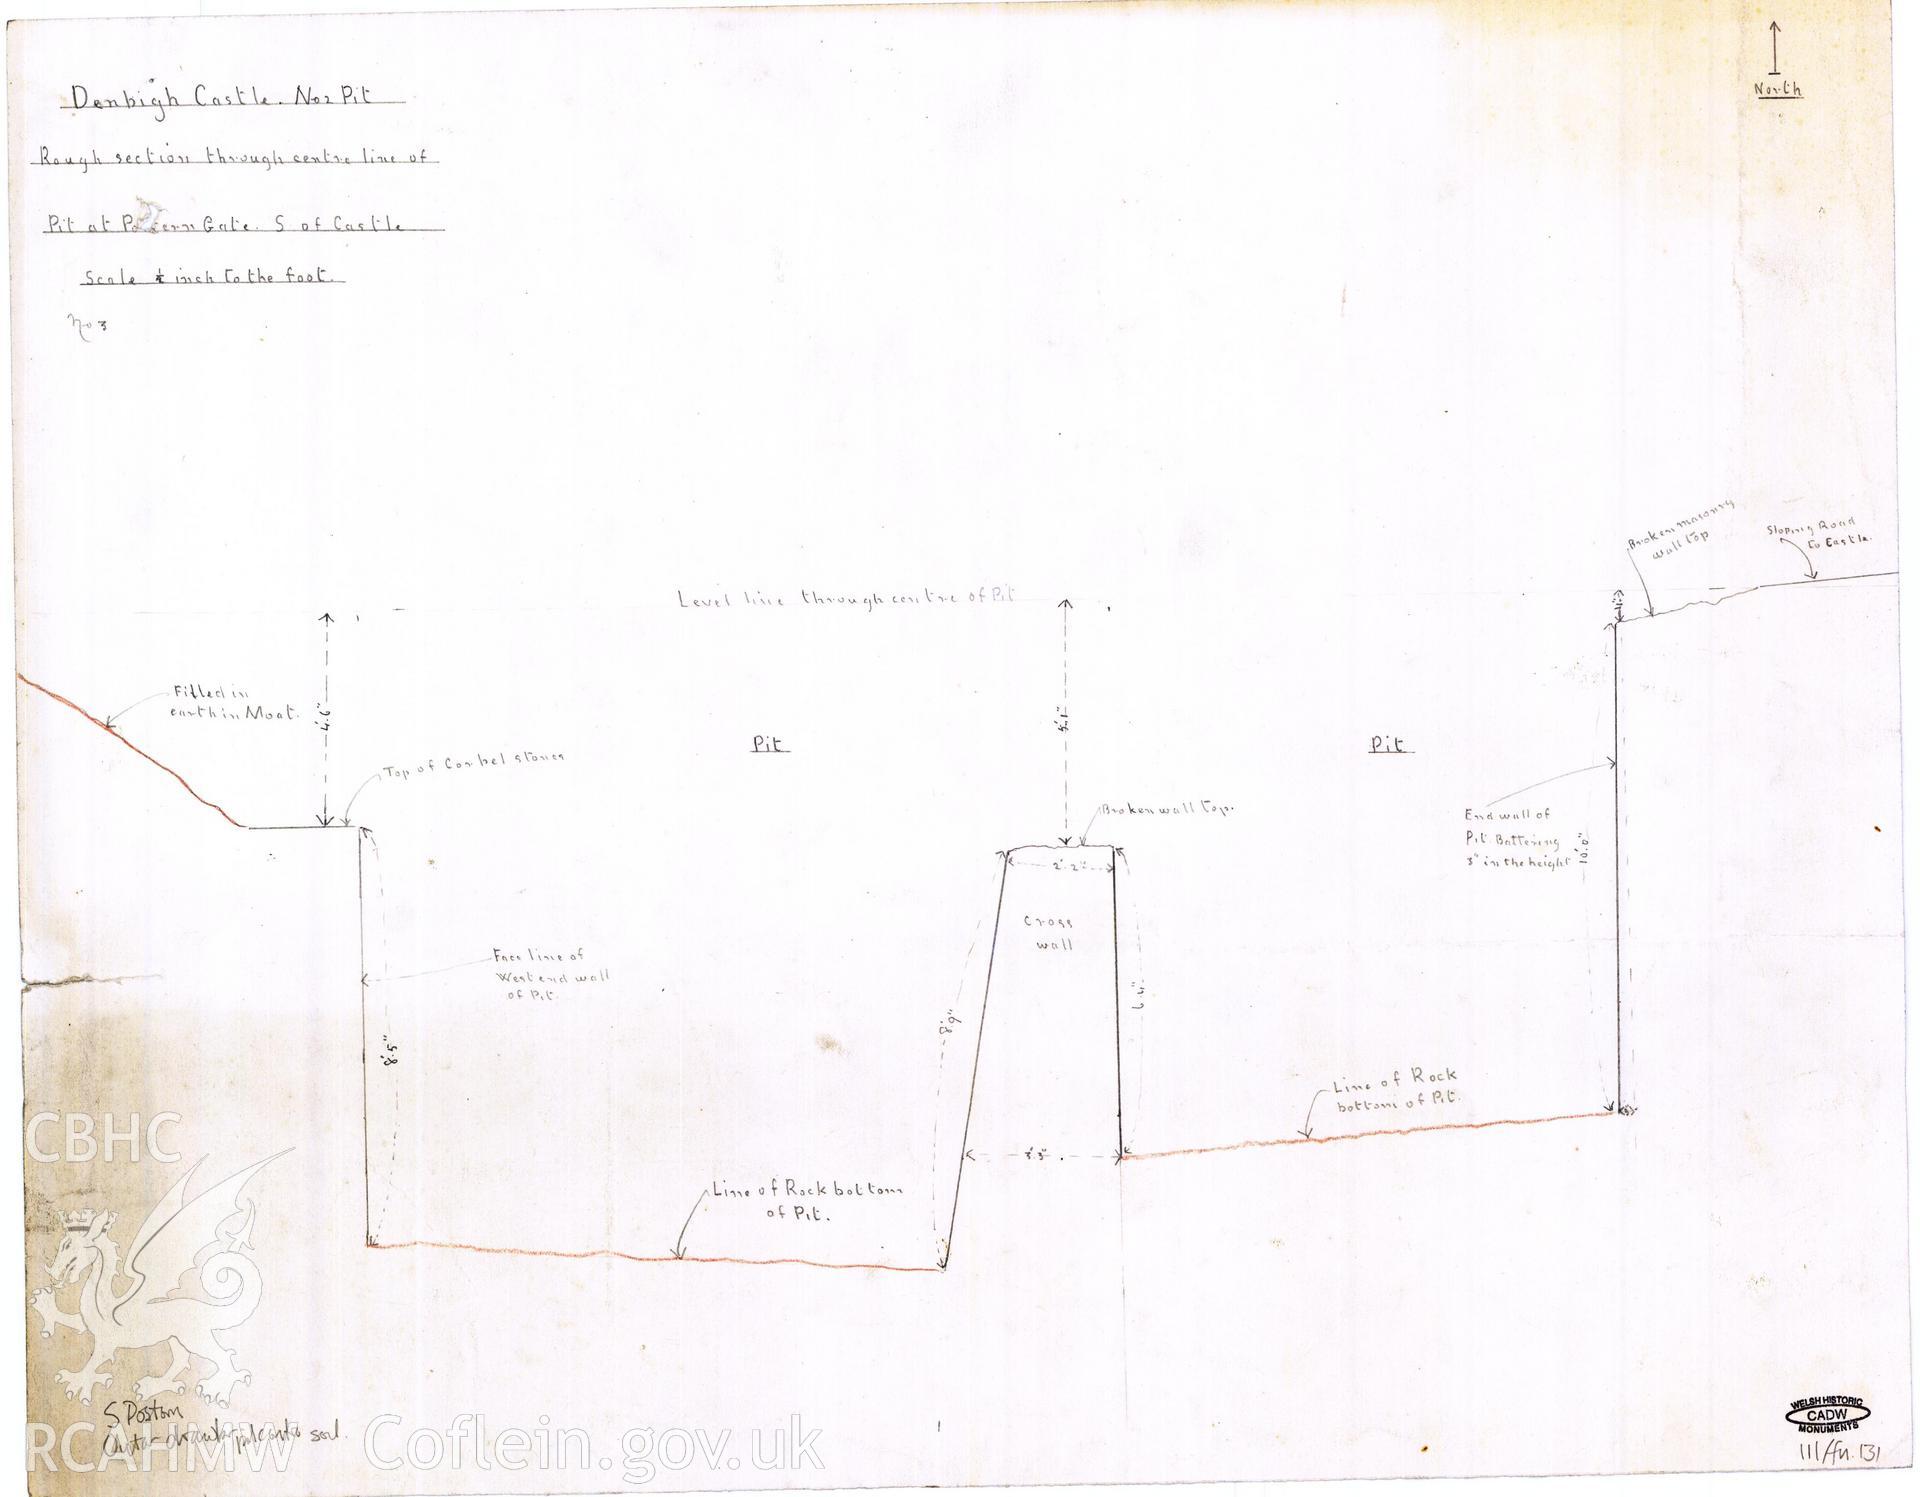 Cadw guardianship monument drawing of Denbigh Castle. Section through pit No. 2, Postern Gate. Cadw Ref. No. 111/fn.131. Scale 1:24.